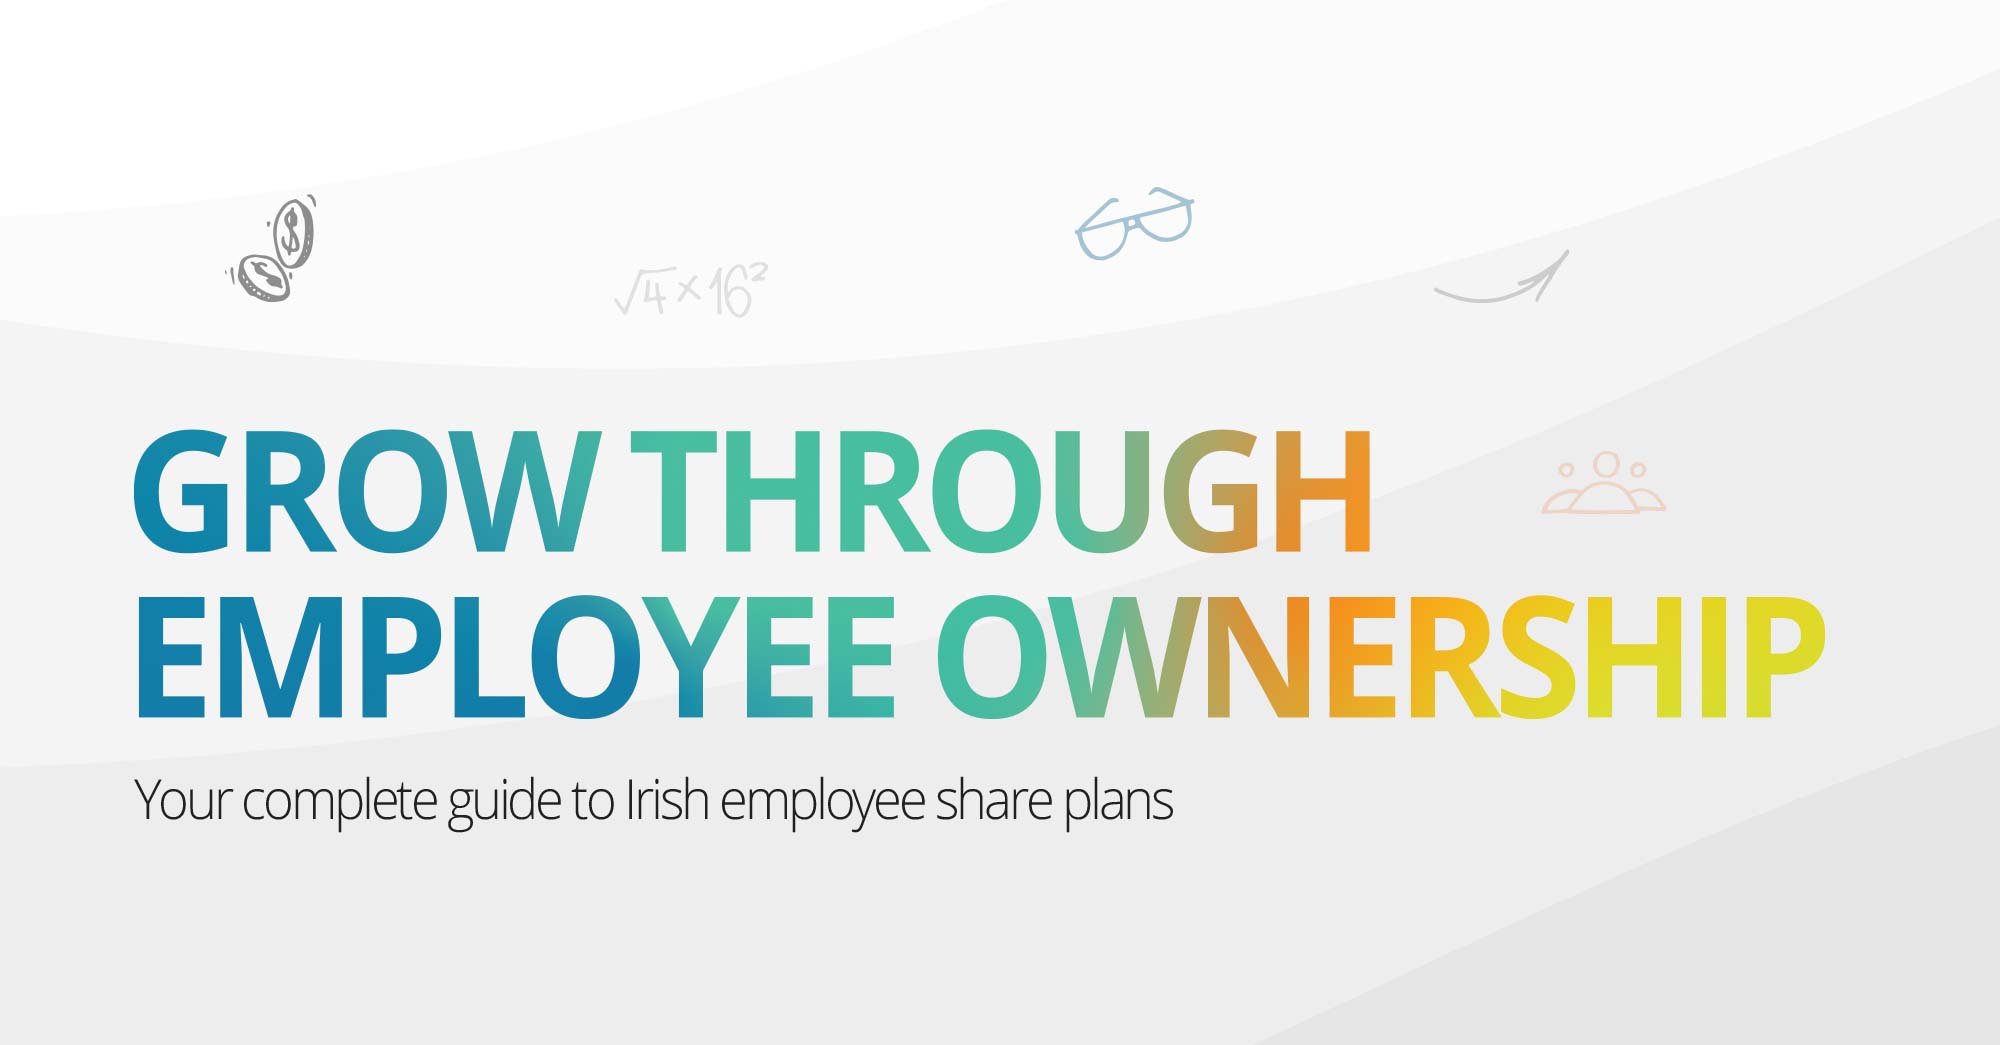 Free Download: A guide to Irish employee share plans